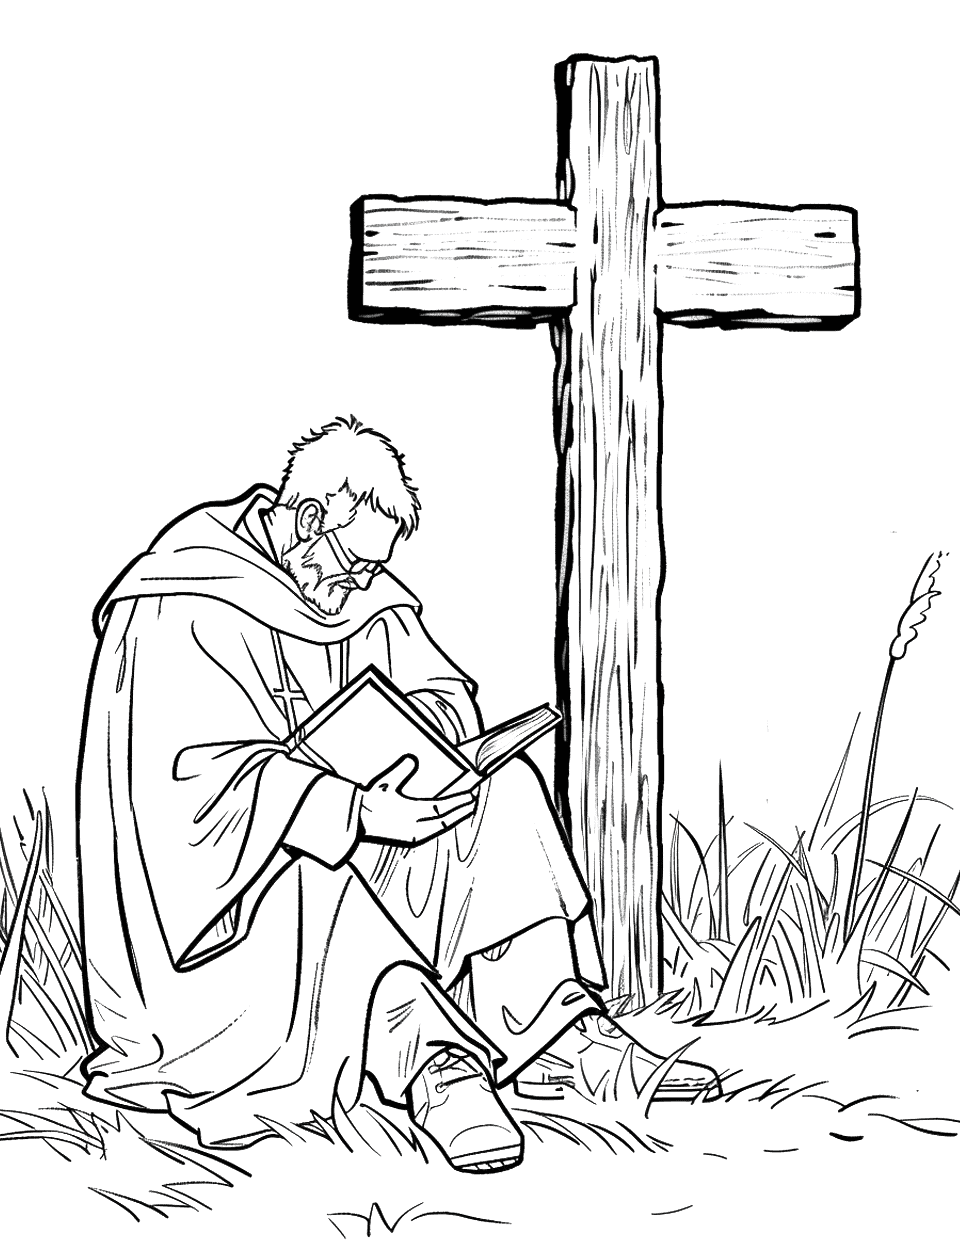 Father Reading by a Cross Coloring Page - A priest, or father, reading a book by a simple wooden cross.